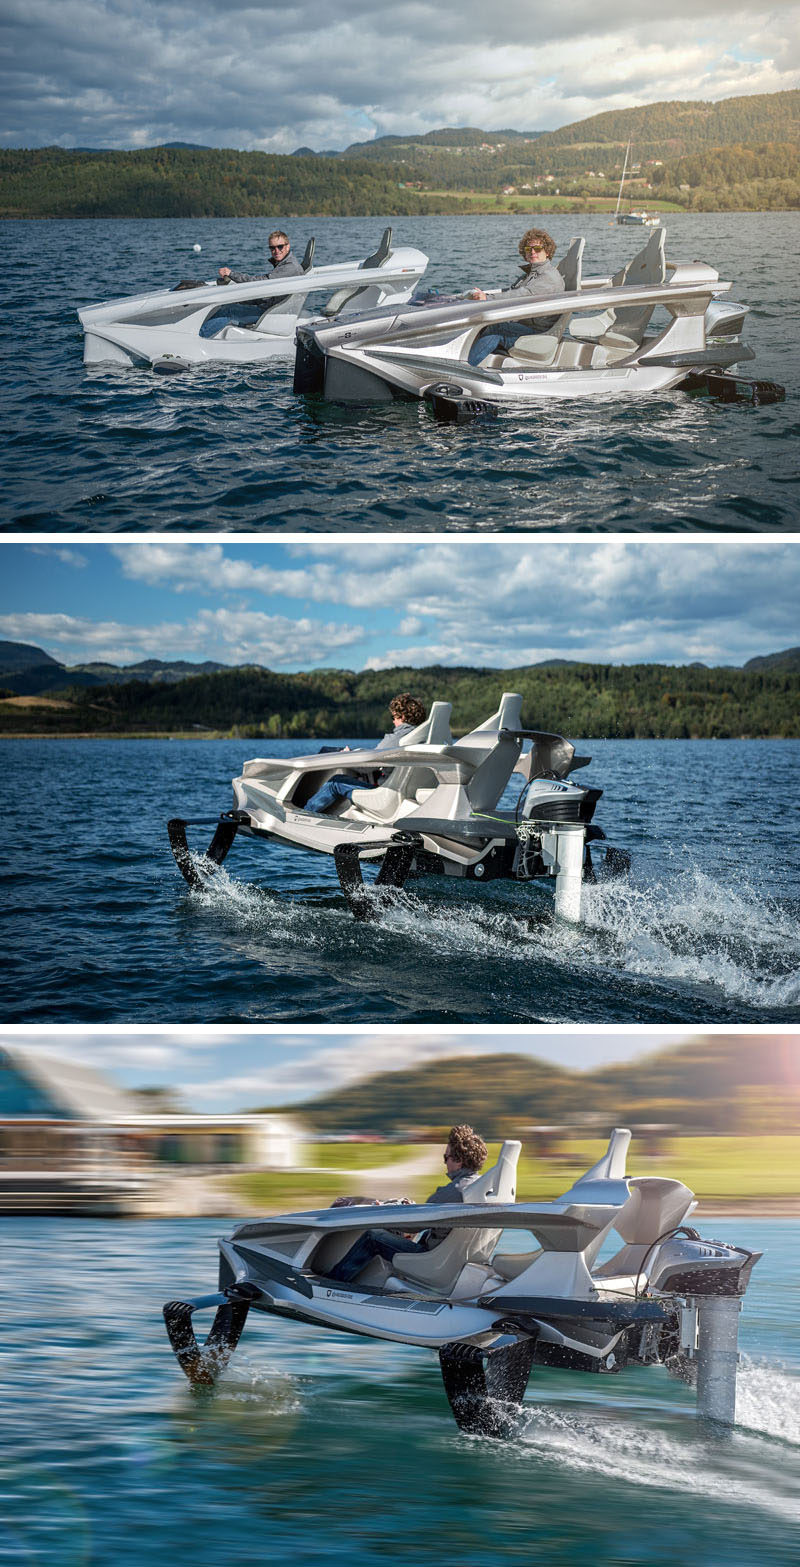 The Q2S electric watercraft by Quadrofoil has a sleek design that allows it to lift out of the water and simulate the feeling of flying.